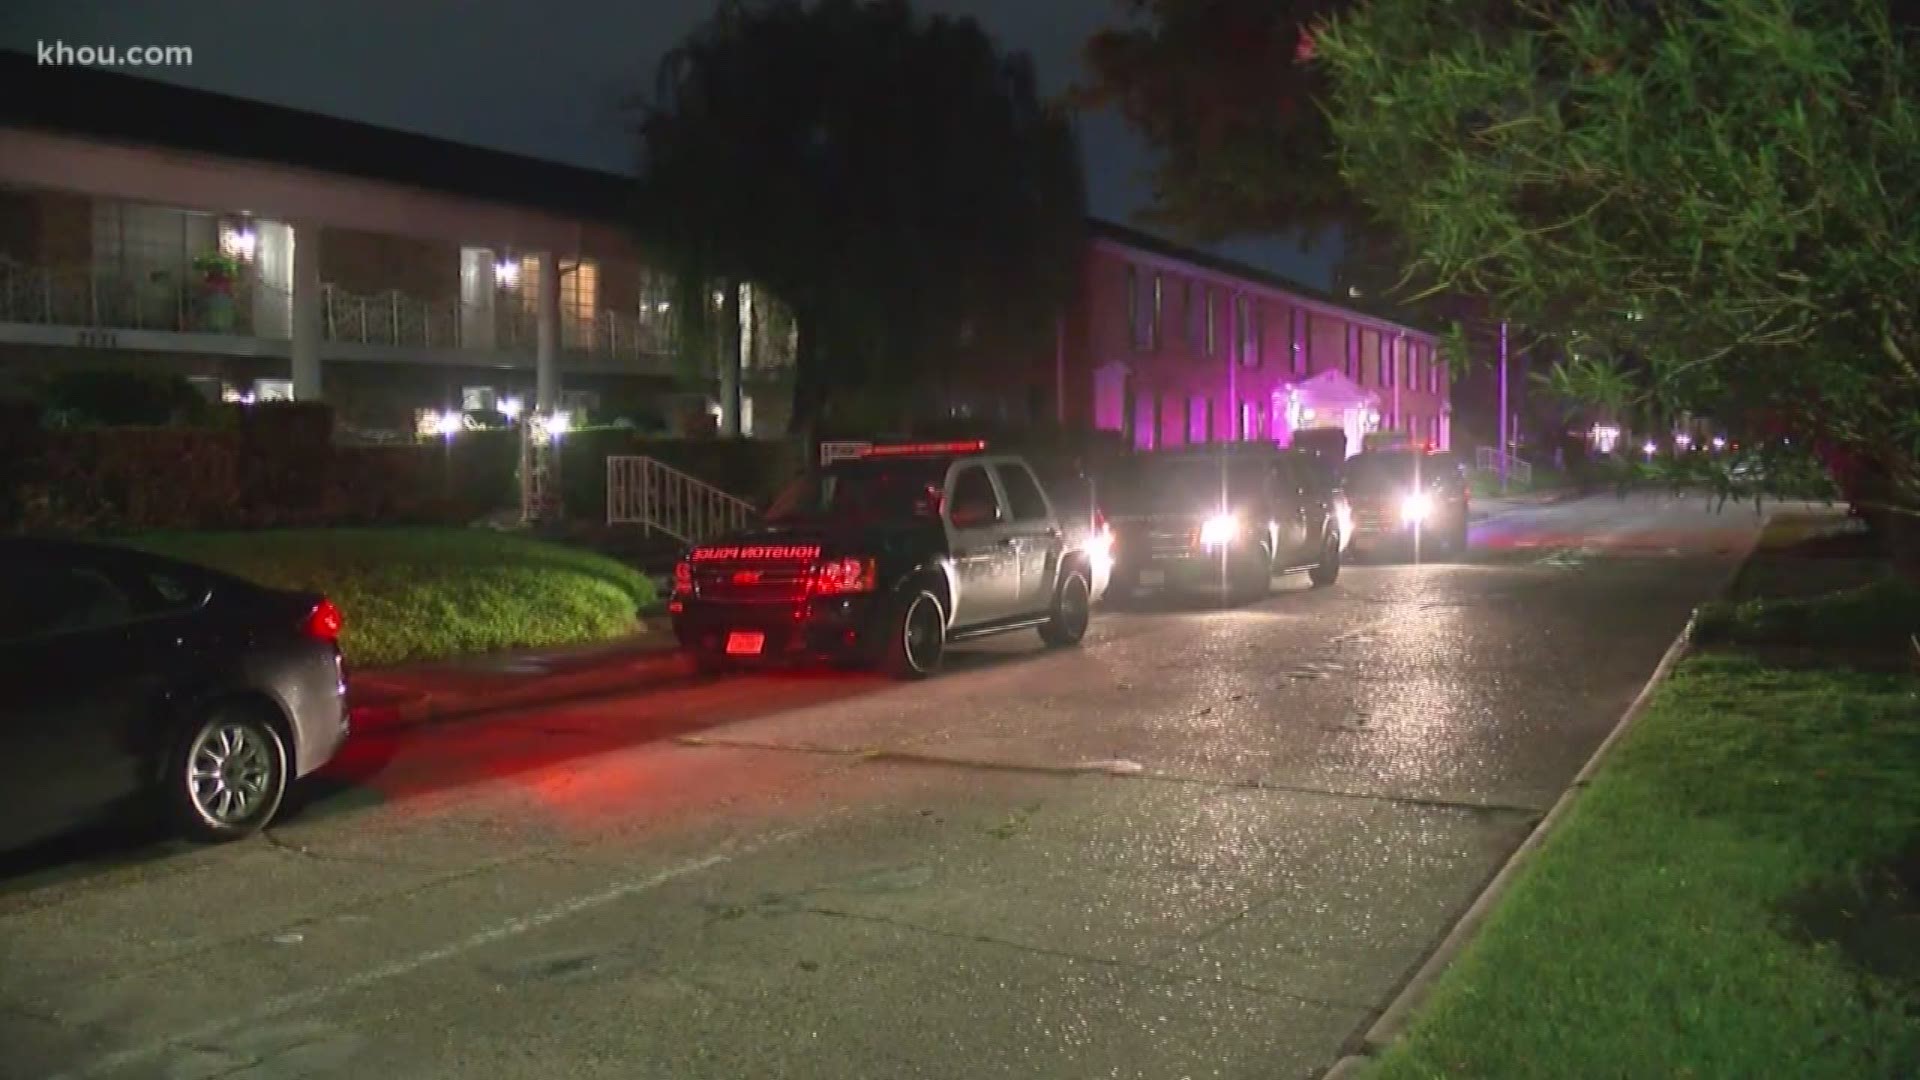 A child is in critical condition after being found unresponsive in a swimming pool in west Houston. Police and fire departments responded around 7:40 p.m. to reports of a drowning on Fountain View, where a father and his 5-year-old son had been swimming. The father, according to police, became distracted at some point and the boy was found unresponsive in the pool.